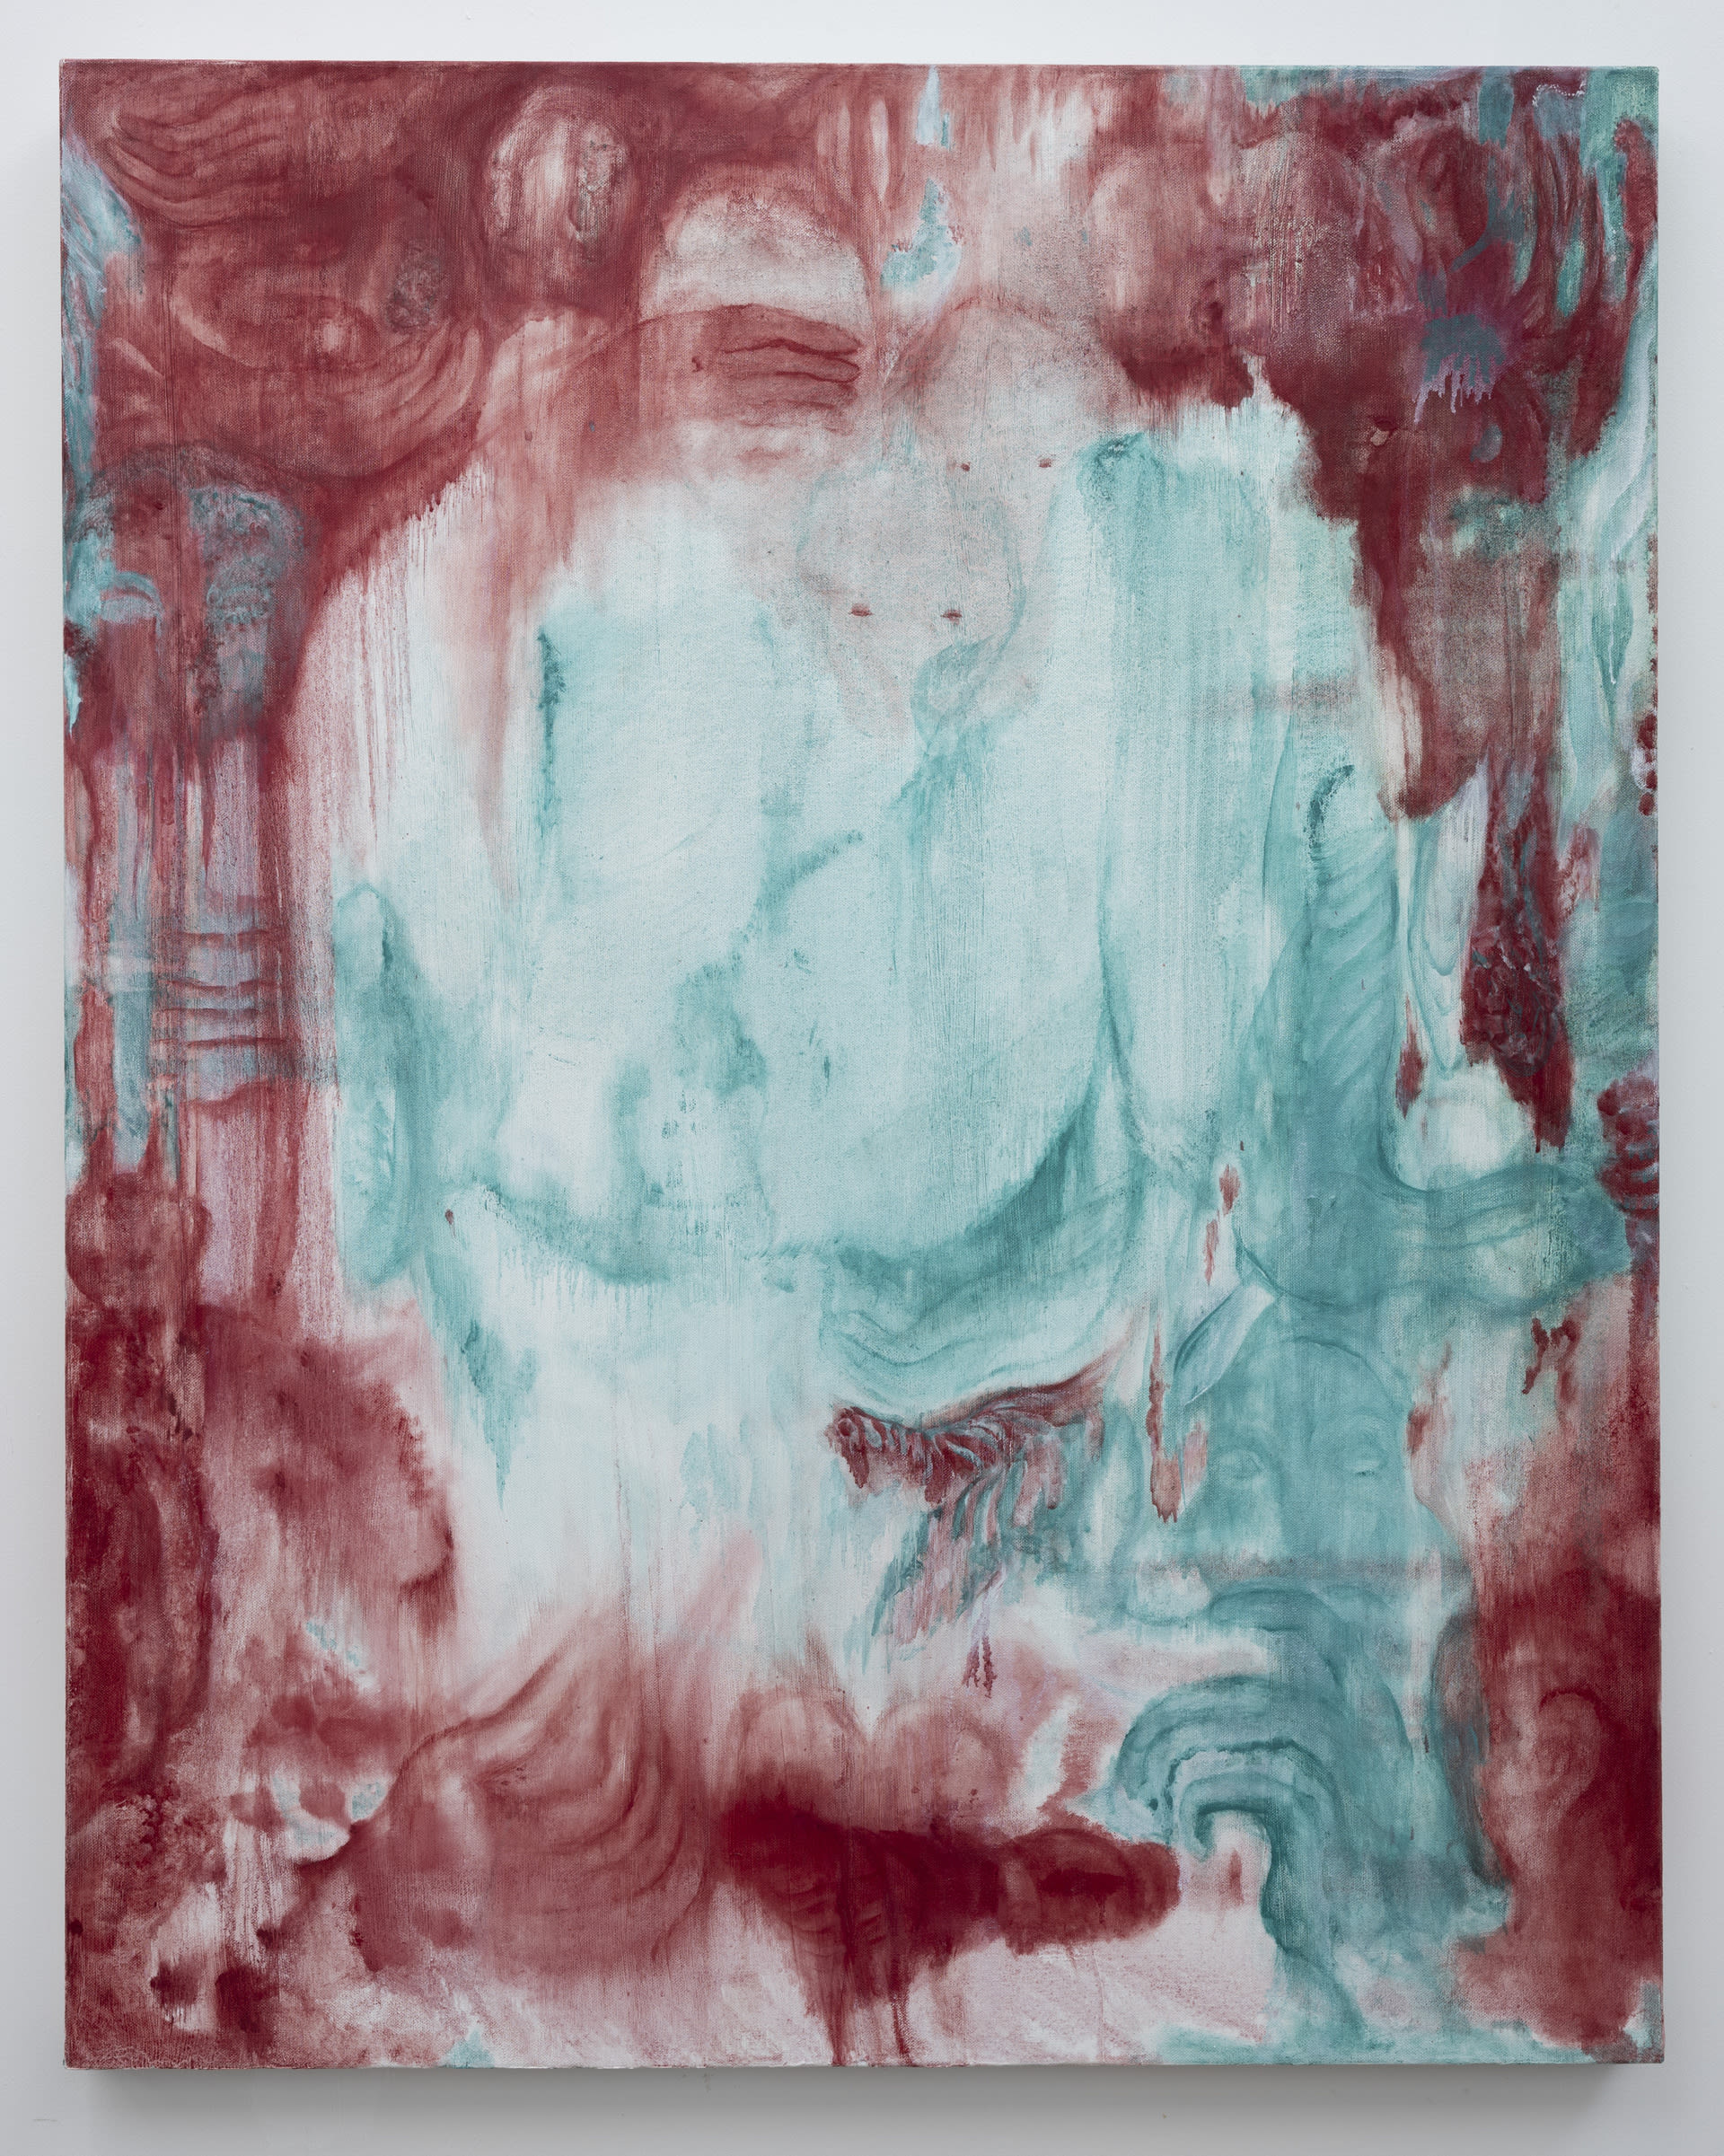 Abstract image of reddish brown and teal green in washy strokes and smears, with what appears to be three huddled figures in the centre, one with a hand over their eyes.